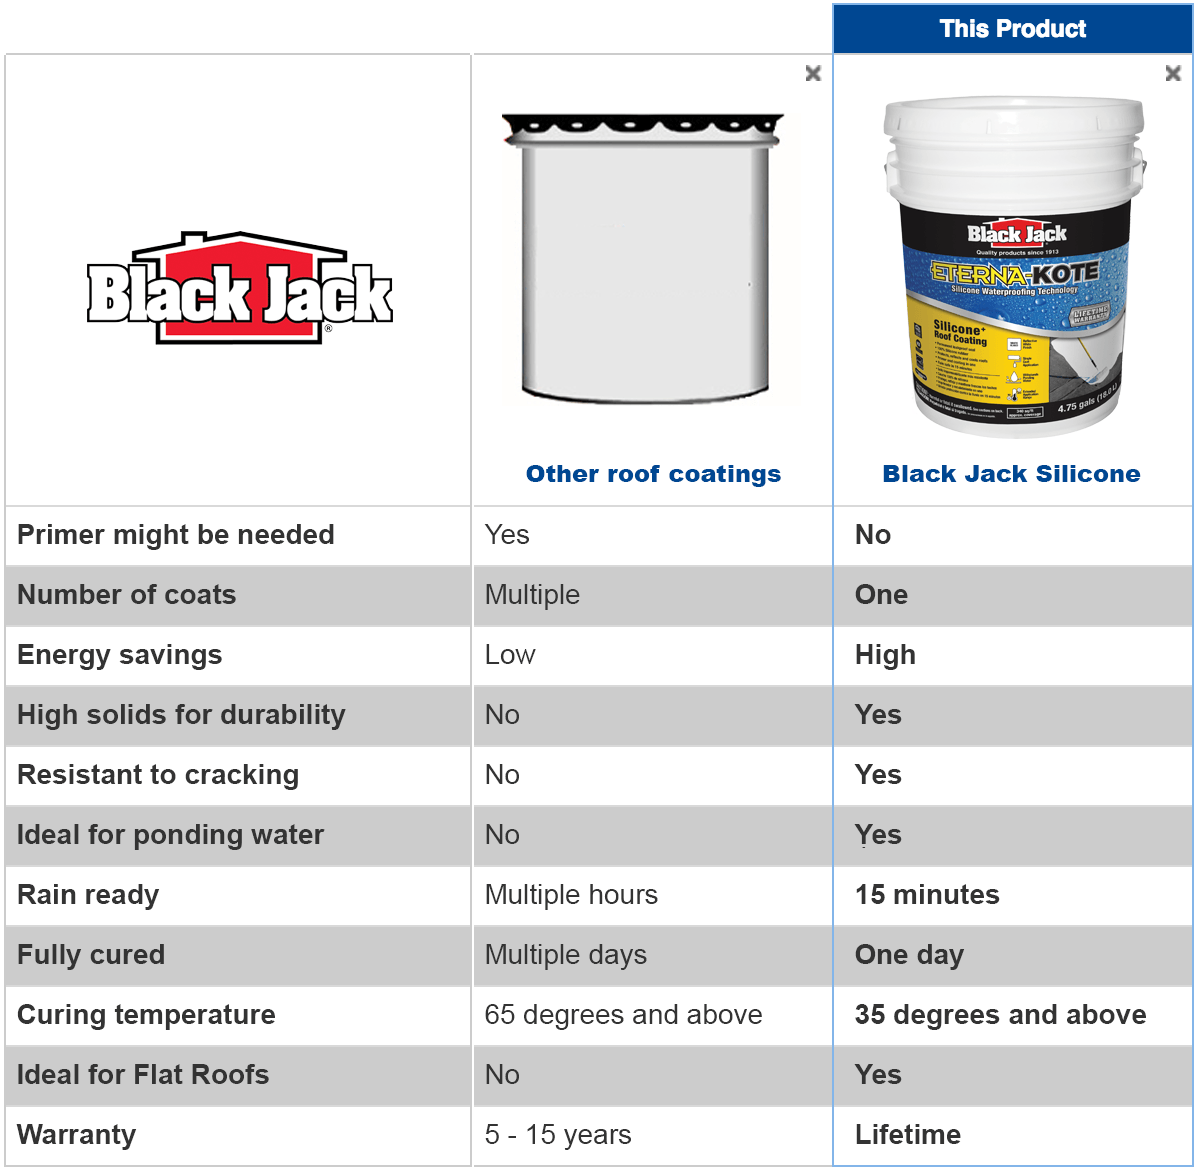 Silicone Vs Acrylic Roof Coatings Which Is Right For My Roof